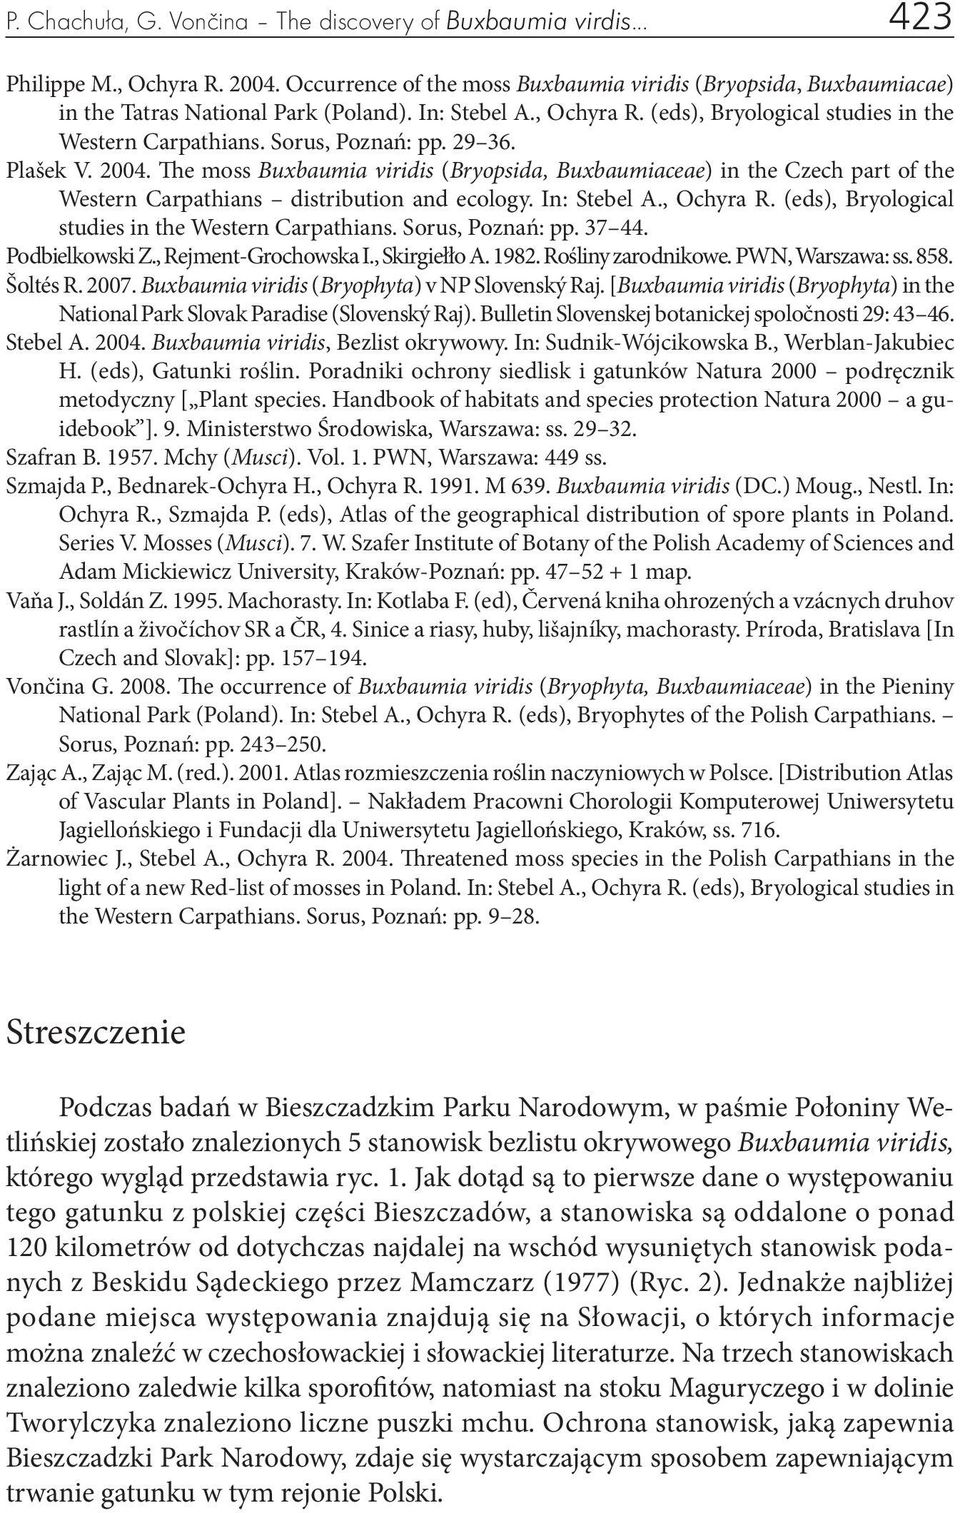 The moss Buxbaumia viridis (Bryopsida, Buxbaumiaceae) in the Czech part of the Western Carpathians distribution and ecology. In: Stebel A., Ochyra R.